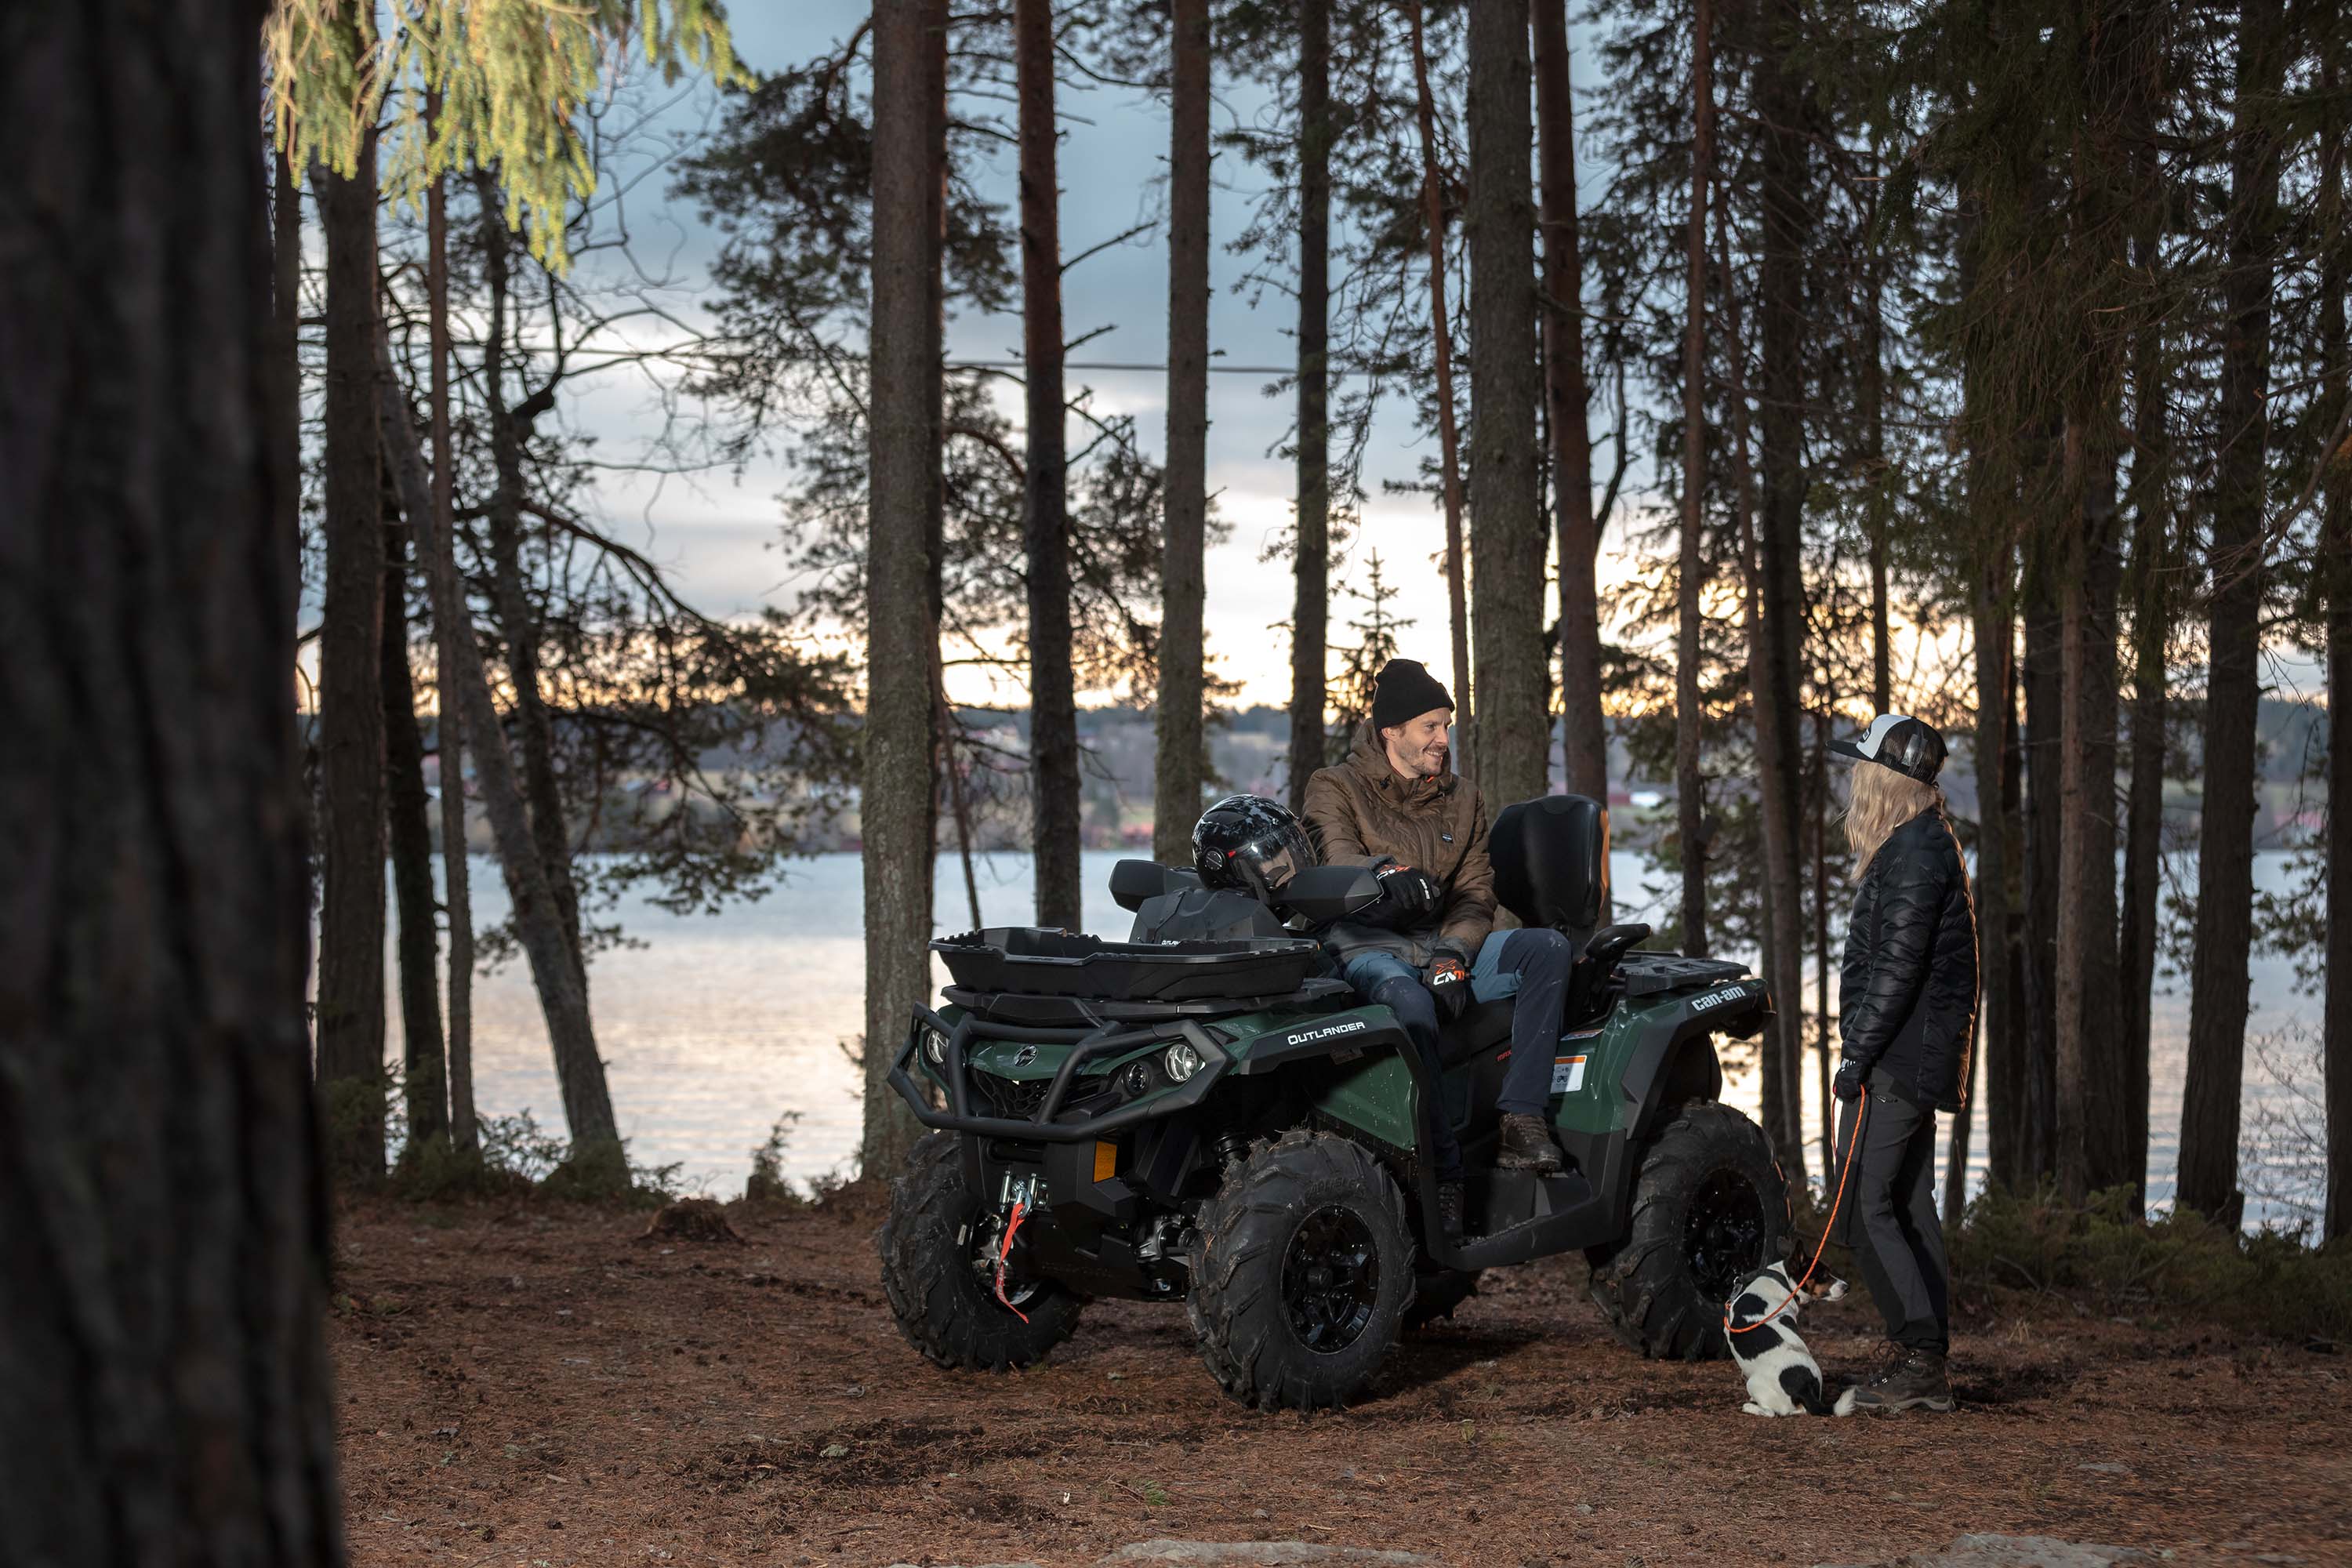 All Can-Am Off-Road ATV & Side-by-Side models near a lake